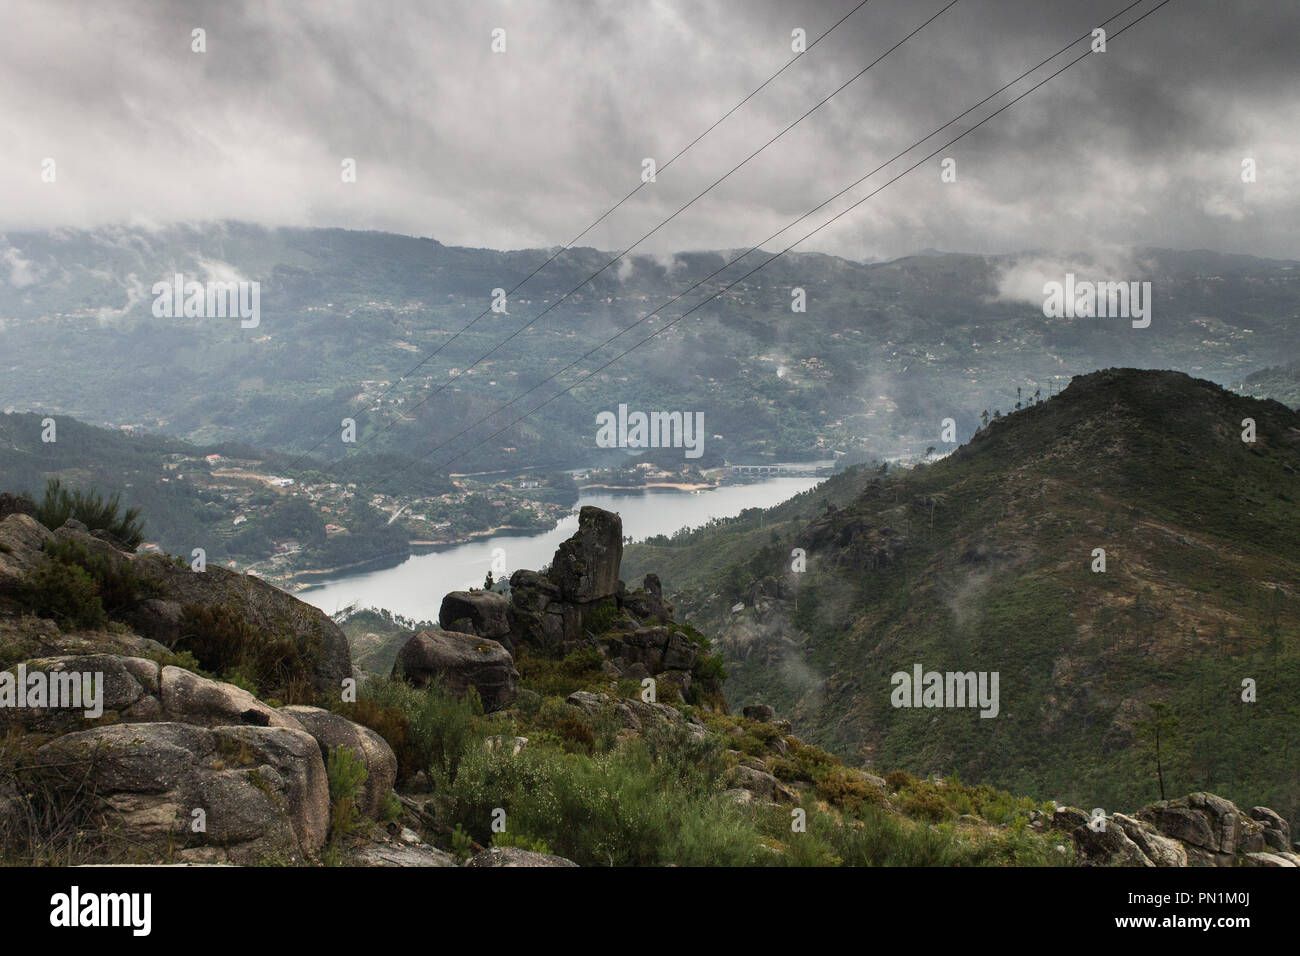 Mountain landscape during a stormy misty day. Stock Photo